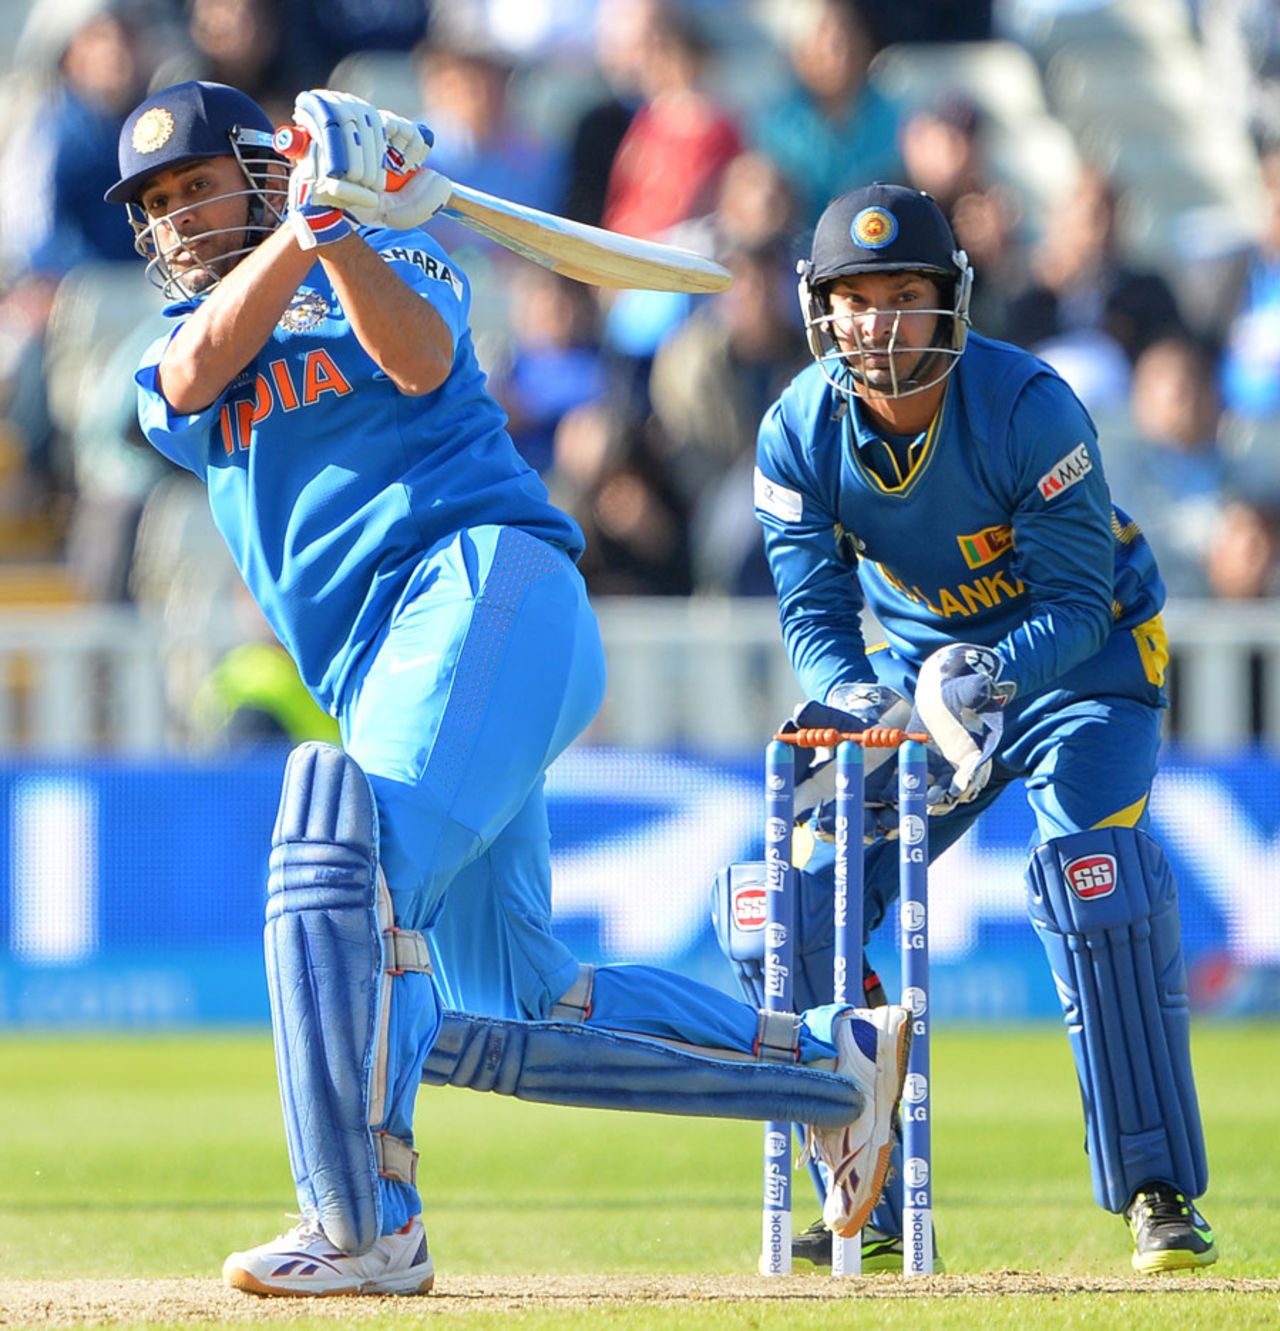 MS Dhoni hits to the leg side, India v Sri Lanka, Champions Trophy 2013 warm-up matches, Cardiff, June 1